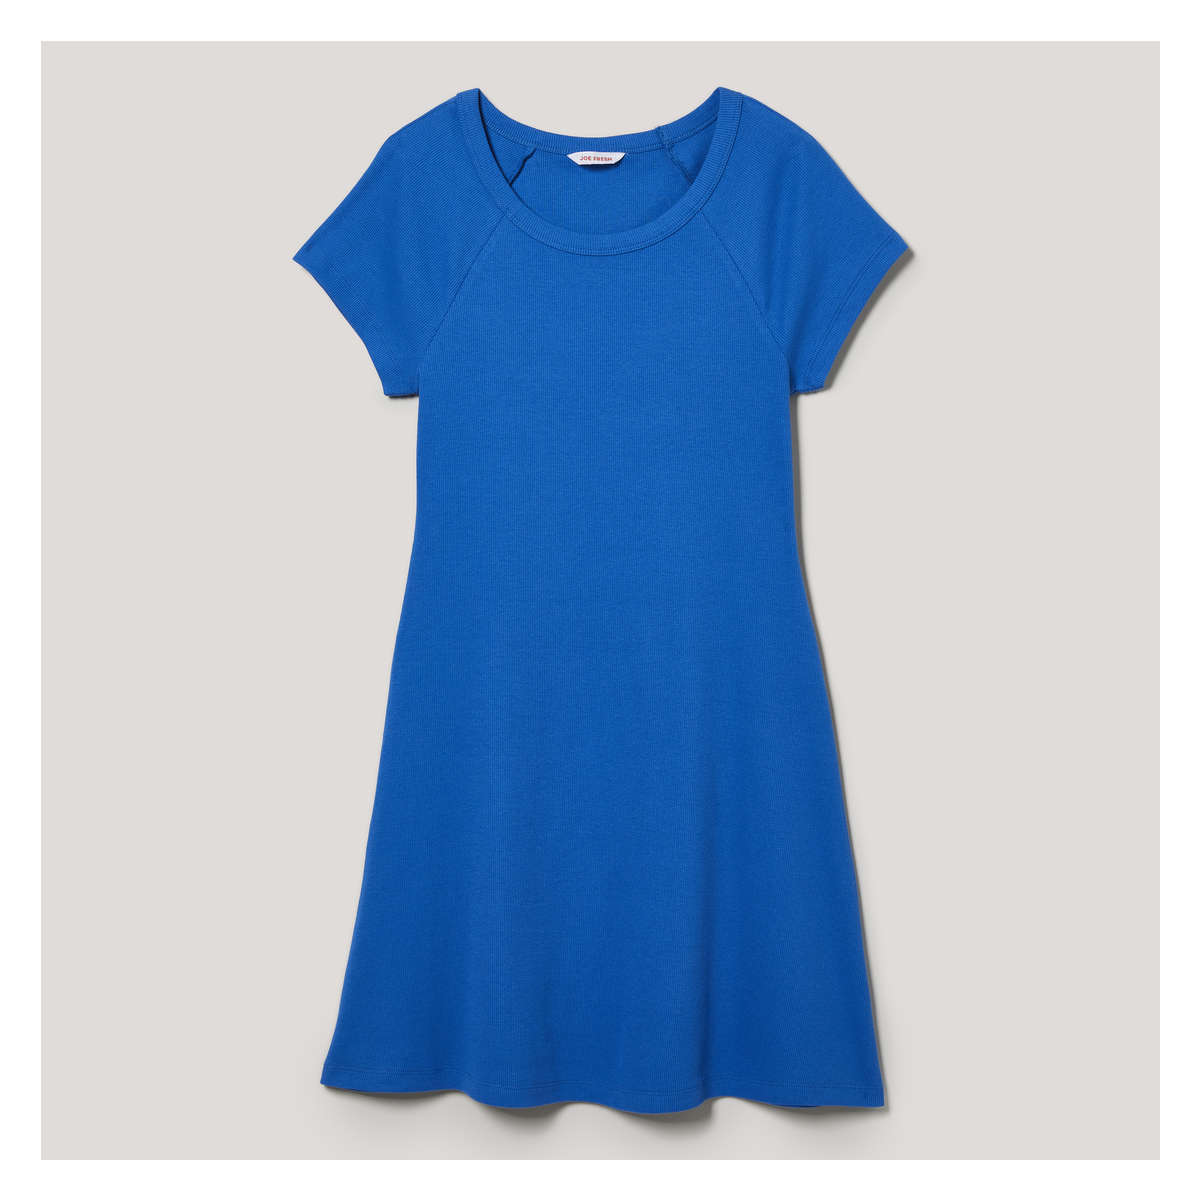 Racer Back Rashie Dress teal and white with blue – www.